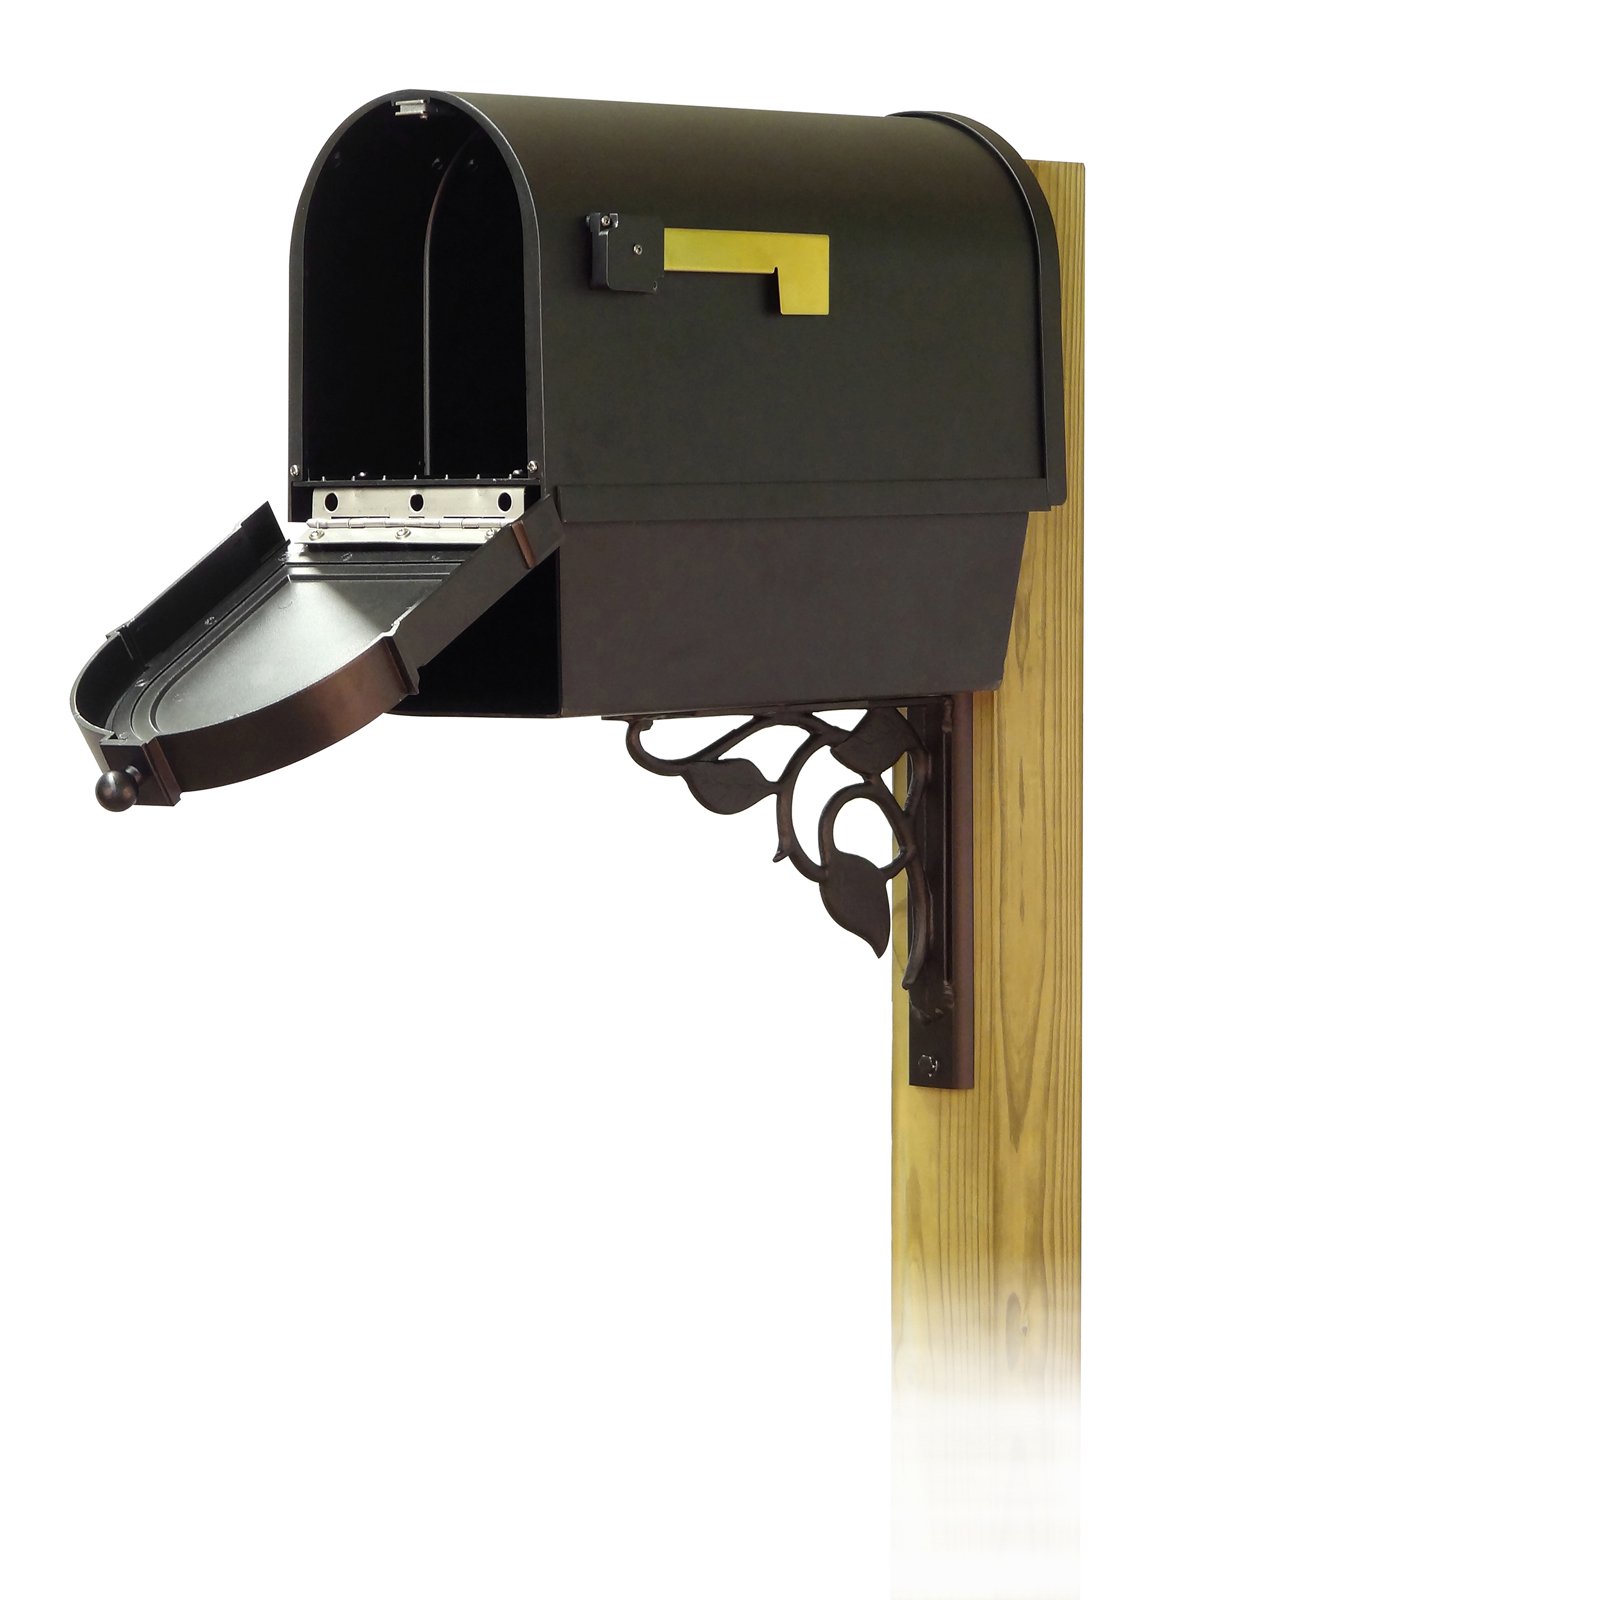 Special Lite Products Berkshire Curbside Mailbox with Front Address Numbers Newspaper Tube and Floral Mailbox Mounting Bracket - image 4 of 4